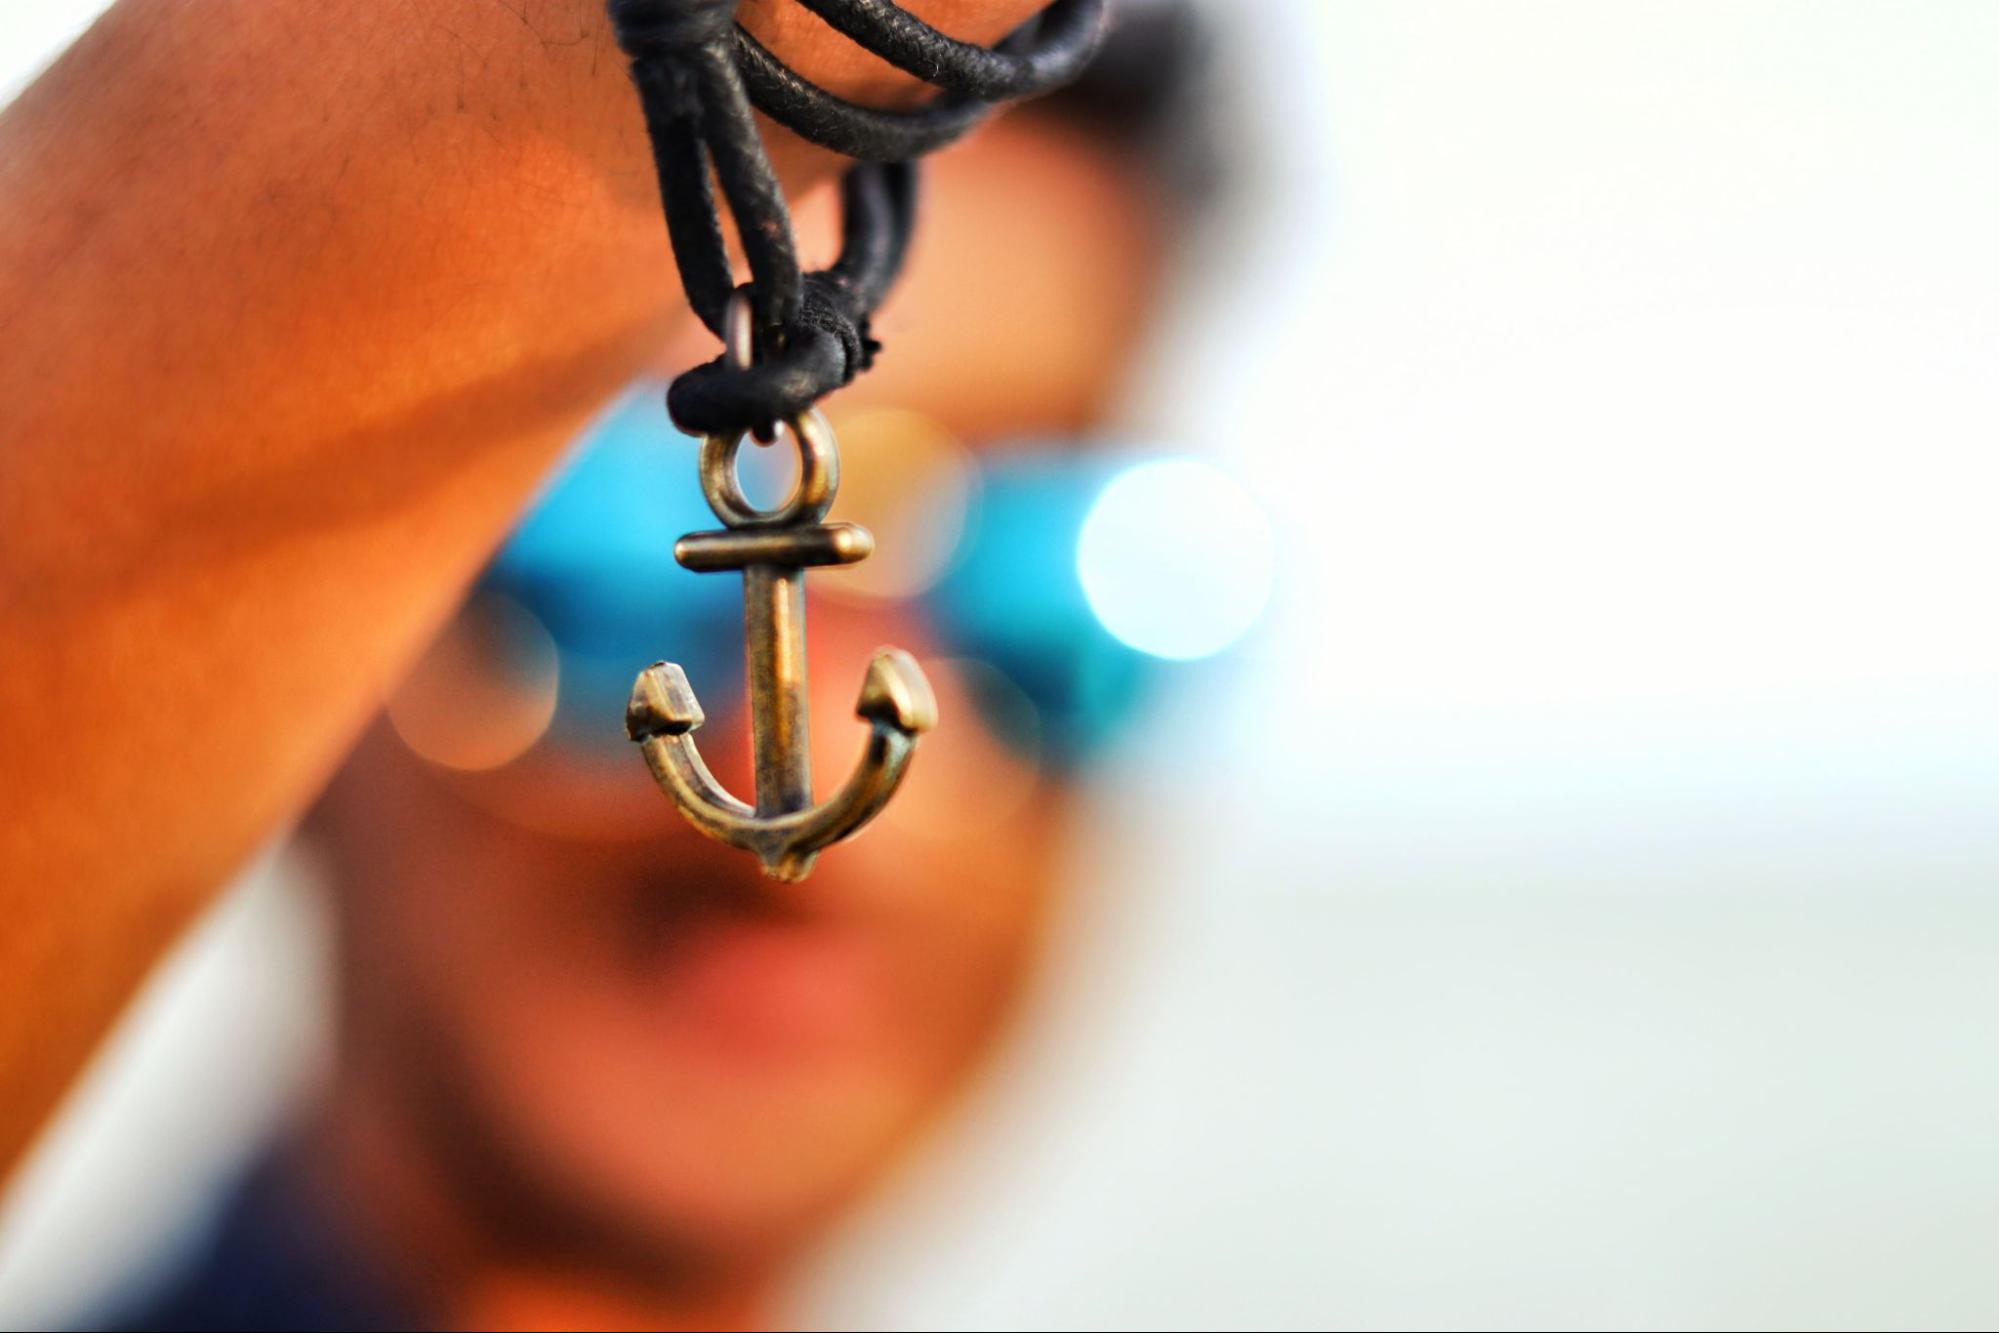 close up image of a person’s wrist wearing a leather bracelet with an anchor charm